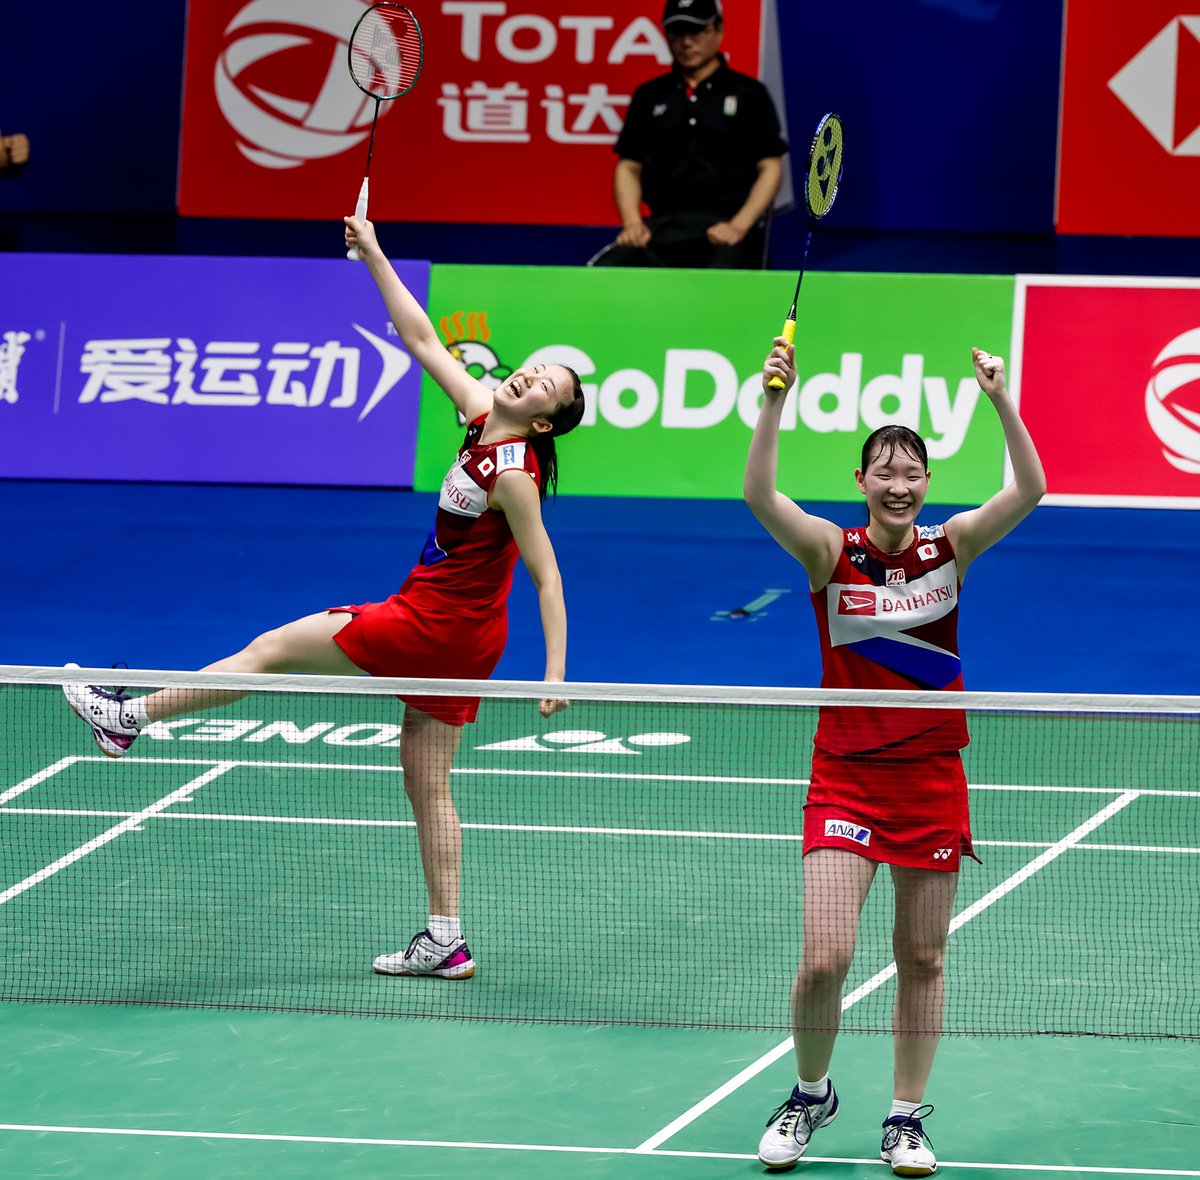 Team Japan dismantles Indonesia to  advance to the finals of the #TOTALBWFSC2019!

Read full tie details at bit.ly/2HUY6Ne

#TeamYonex #YonexBadminton

📸: Badminton Photo